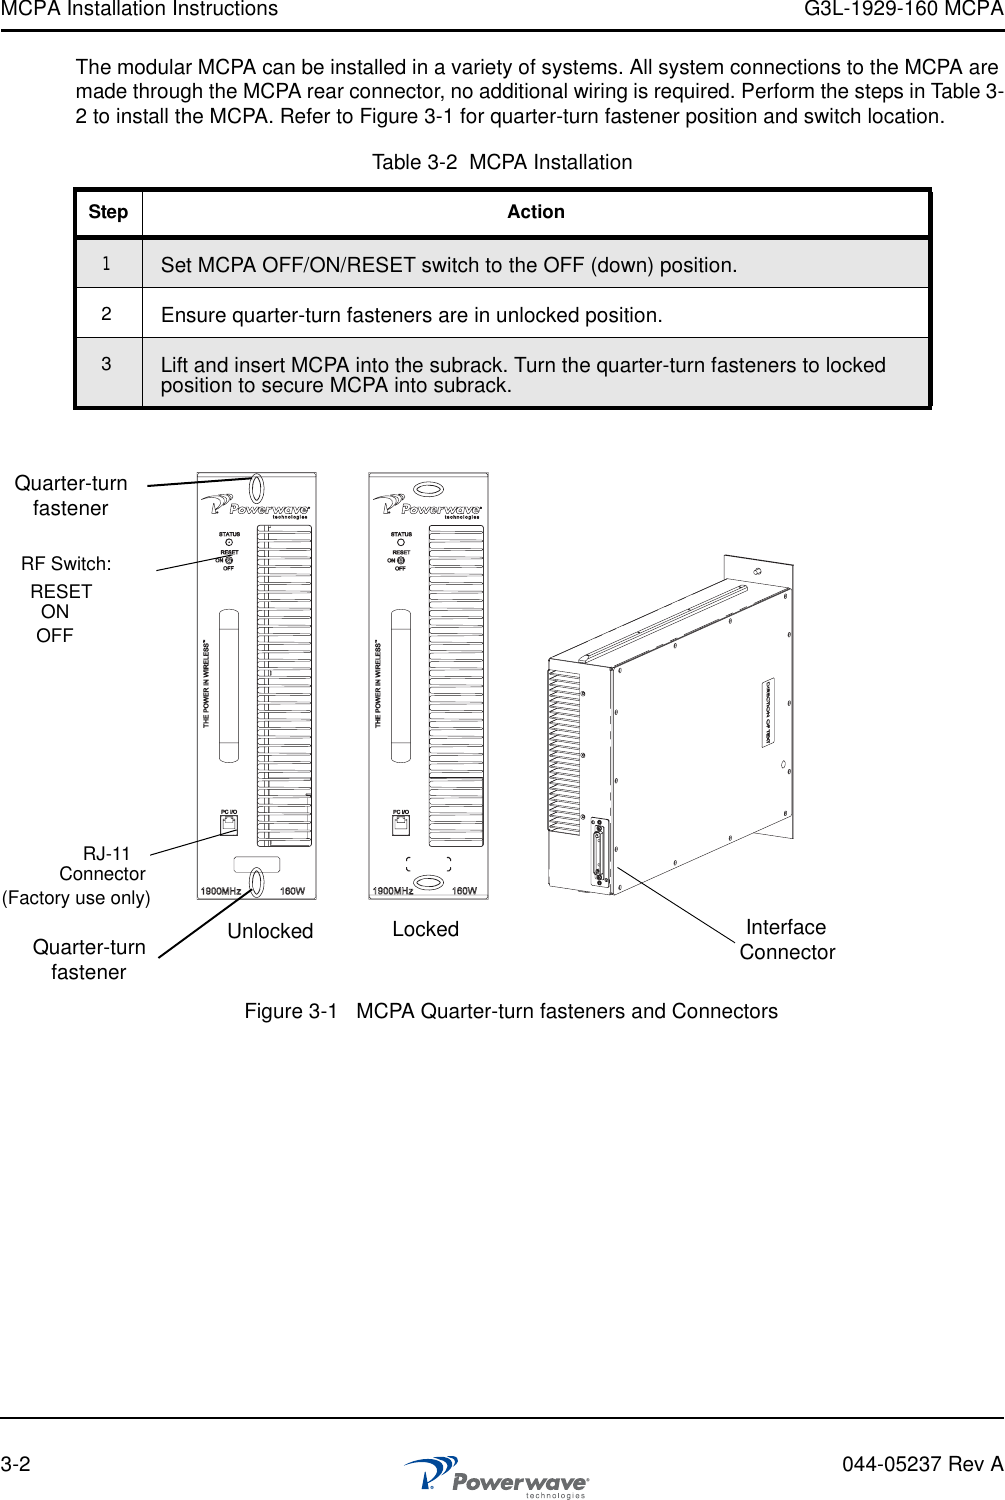 MCPA Installation Instructions G3L-1929-160 MCPA3-2 044-05237 Rev AThe modular MCPA can be installed in a variety of systems. All system connections to the MCPA are made through the MCPA rear connector, no additional wiring is required. Perform the steps in Table 3-2 to install the MCPA. Refer to Figure 3-1 for quarter-turn fastener position and switch location.Table 3-2  MCPA InstallationStep Action1Set MCPA OFF/ON/RESET switch to the OFF (down) position.2Ensure quarter-turn fasteners are in unlocked position.3Lift and insert MCPA into the subrack. Turn the quarter-turn fasteners to locked position to secure MCPA into subrack.Figure 3-1   MCPA Quarter-turn fasteners and ConnectorsRF Switch:RJ-11Connector(Factory use only)Quarter-turnfastenerRESETONOFFQuarter-turnfastenerInterfaceConnectorUnlocked Locked